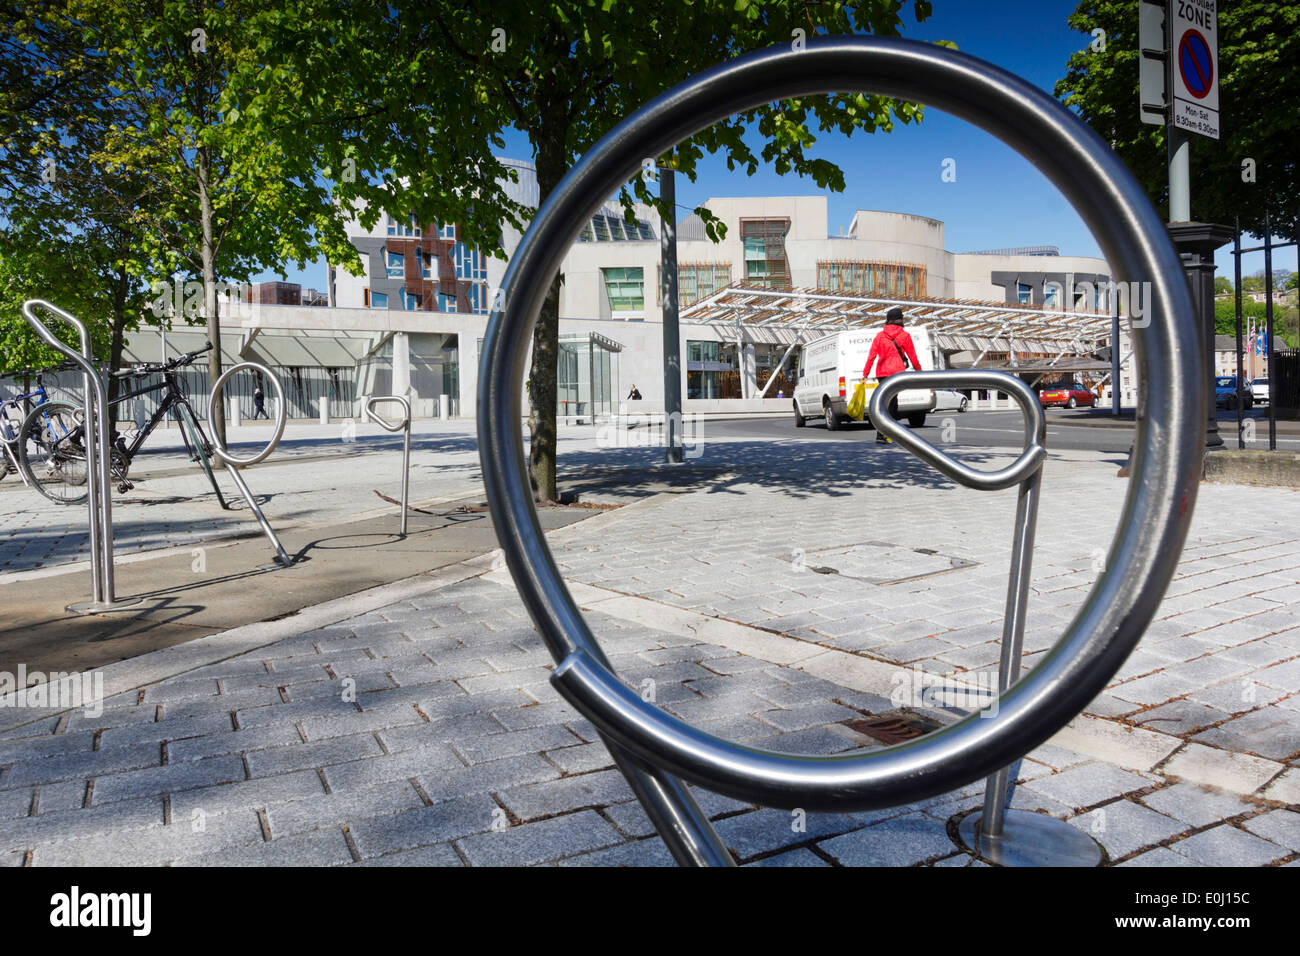 Scottish Parliament Building Through Circle Of Bike Rack. Blue Sky And Green Foliage On Trees Stock Photo